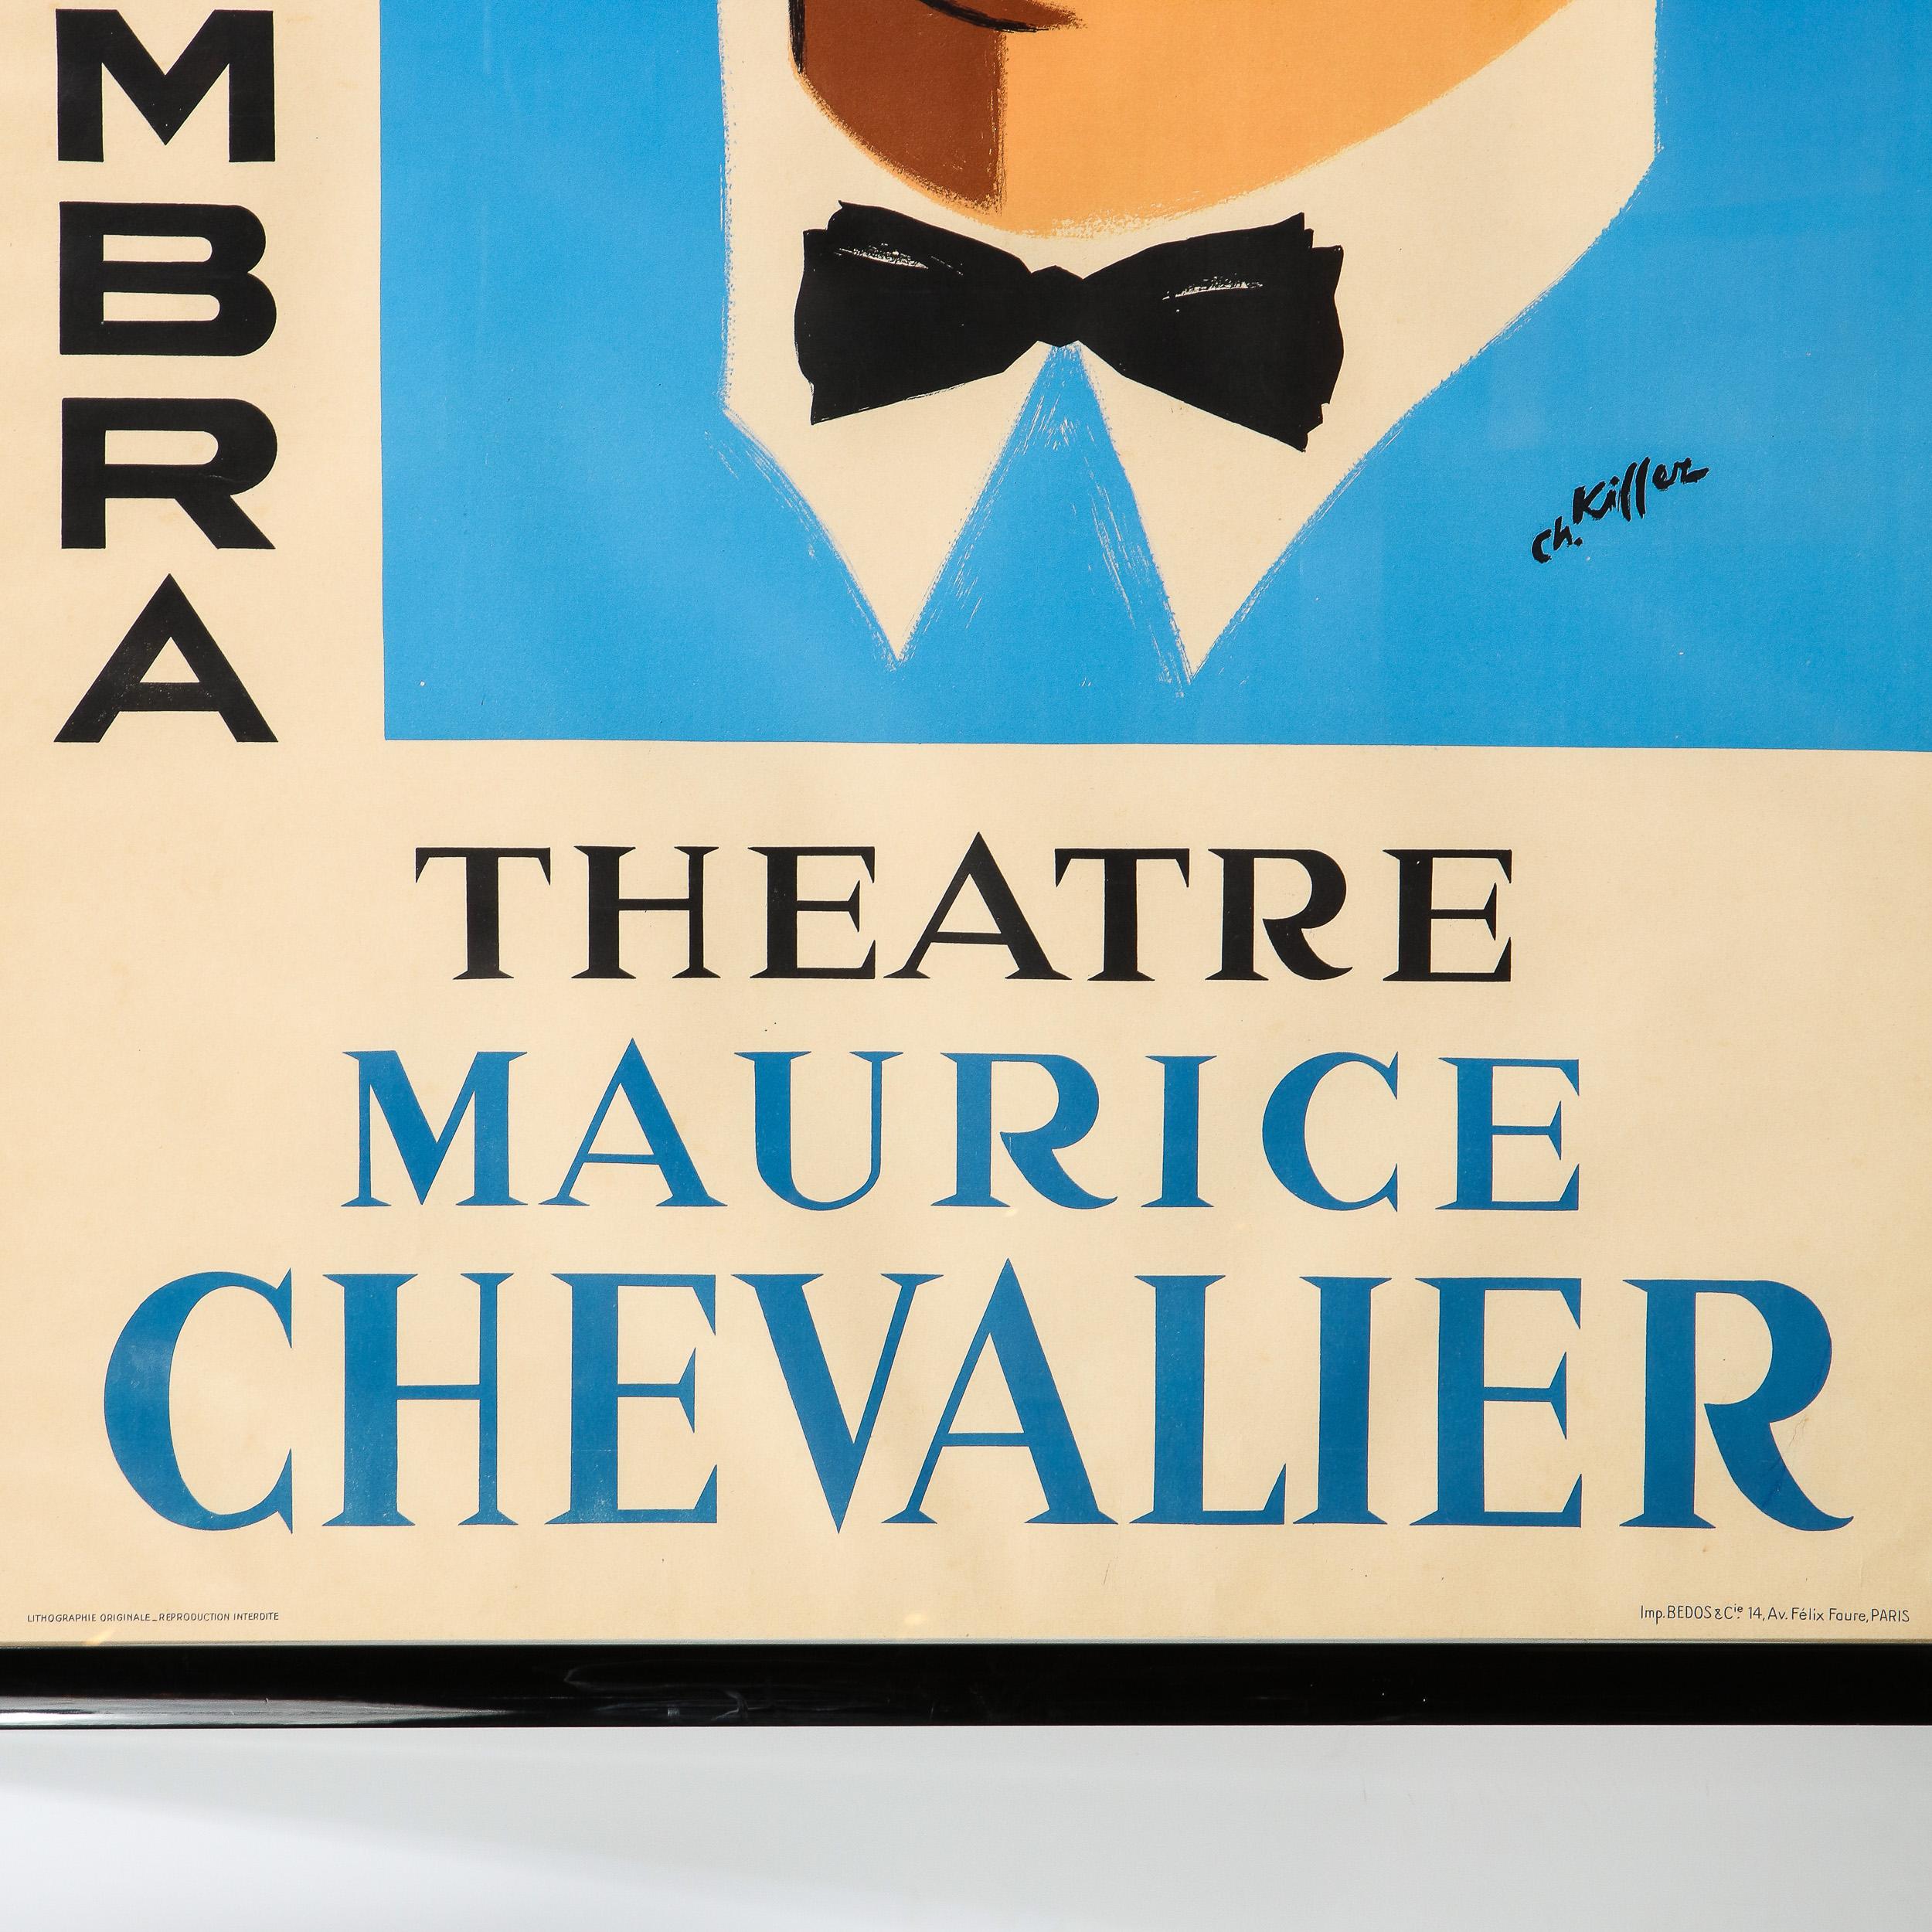 Mid-Century Modern Original Charles Kiffer Lithograph of Alhambra Theatre Maurice Chevalier For Sale